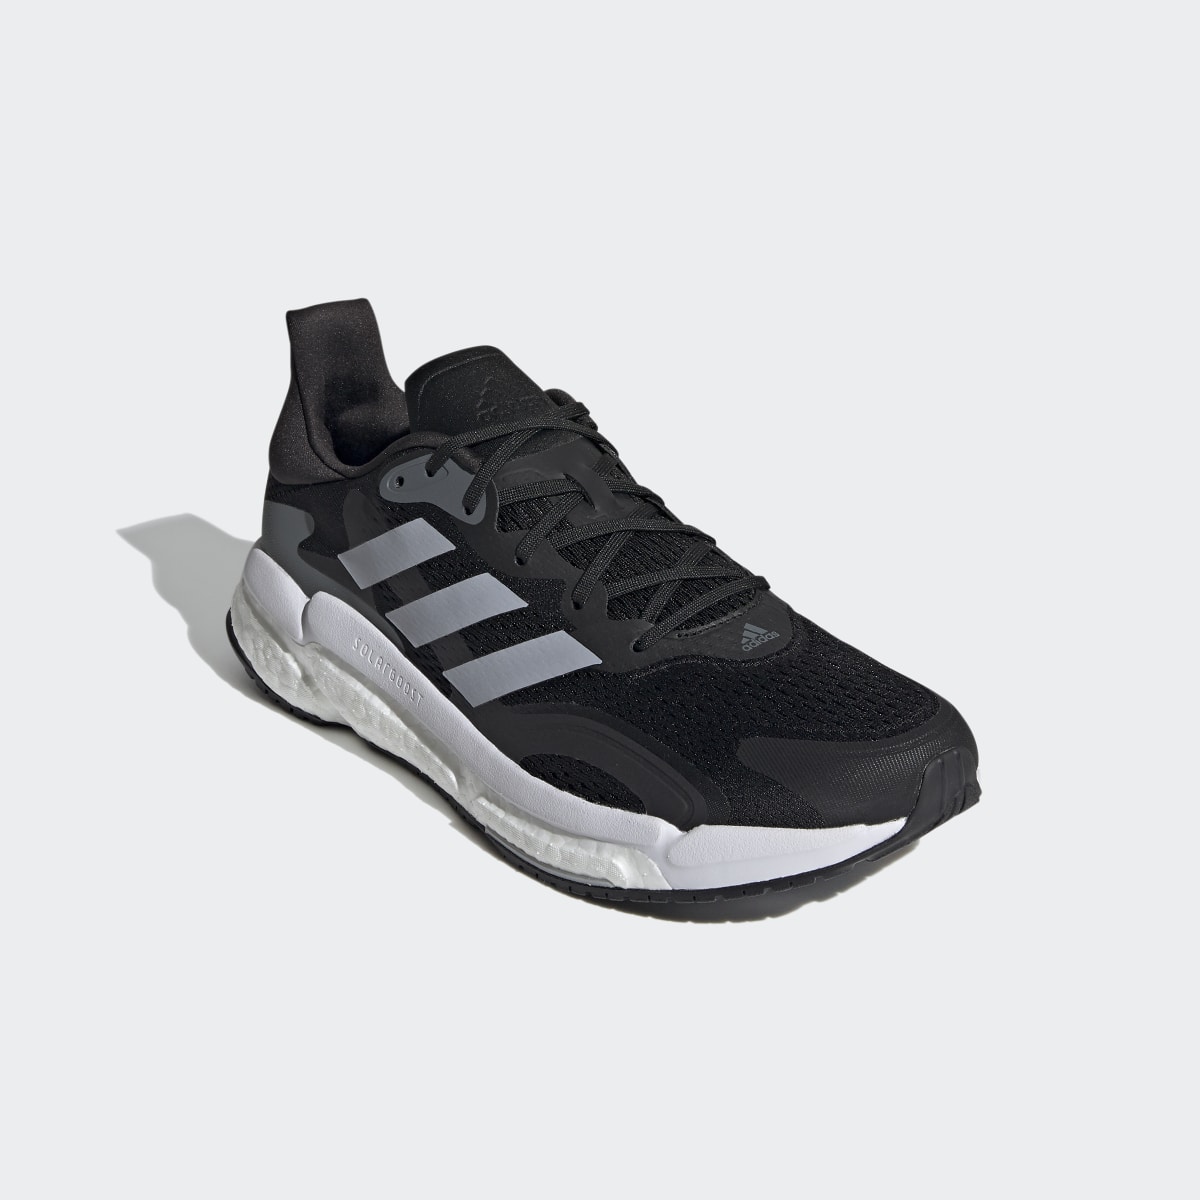 Adidas SolarBoost 3 Shoes. 6